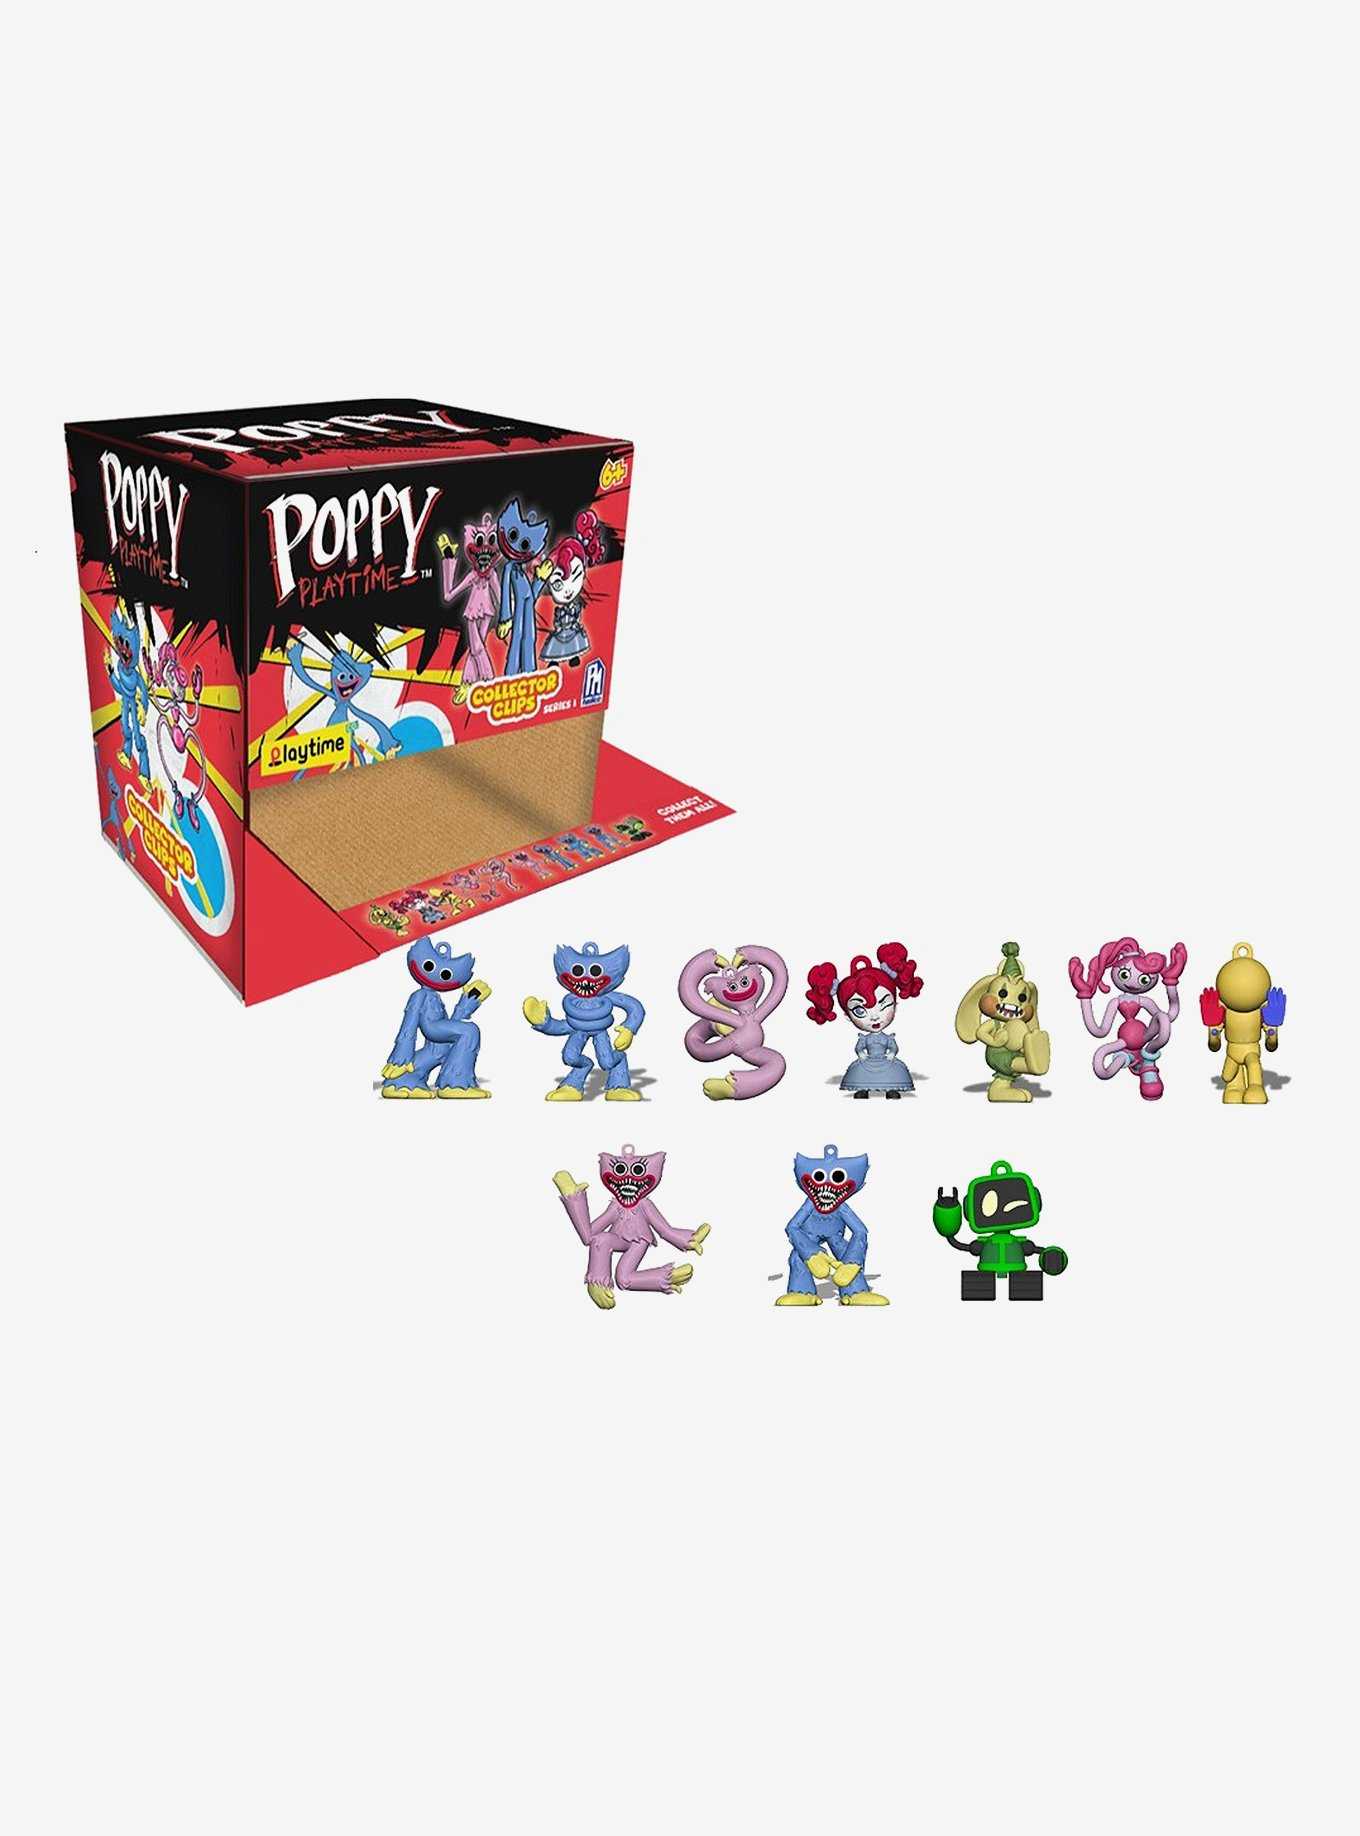 Buy Super Boxy Boo Robot PLaytime CD KEY Compare Prices